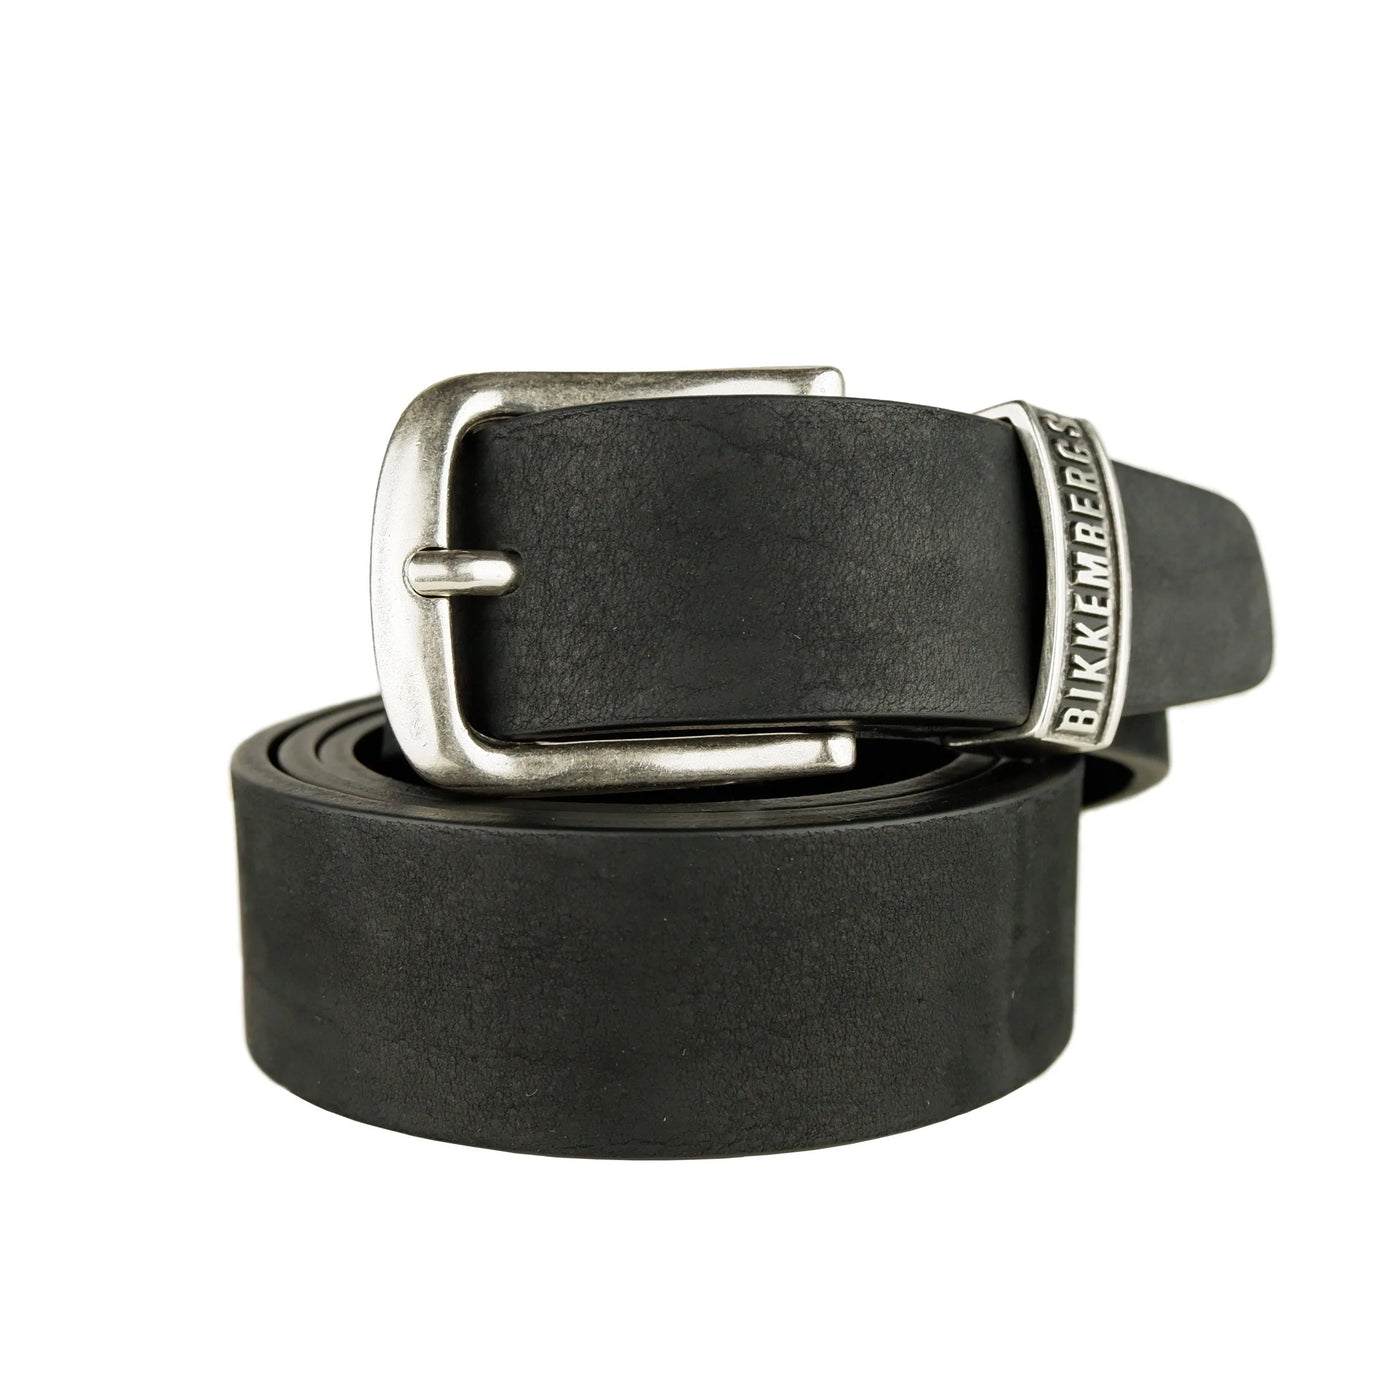 Bikkembergs  Belt #men, 100 cm / 40 Inches, 105 cm / 42 Inches, 110 cm / 44 Inches, 90 cm / 36 Inches, 95 cm / 38 Inches, Belts - Men - Accessories, Bikkembergs, Black, feed-agegroup-adult, feed-color-Black, feed-gender-male at SEYMAYKA